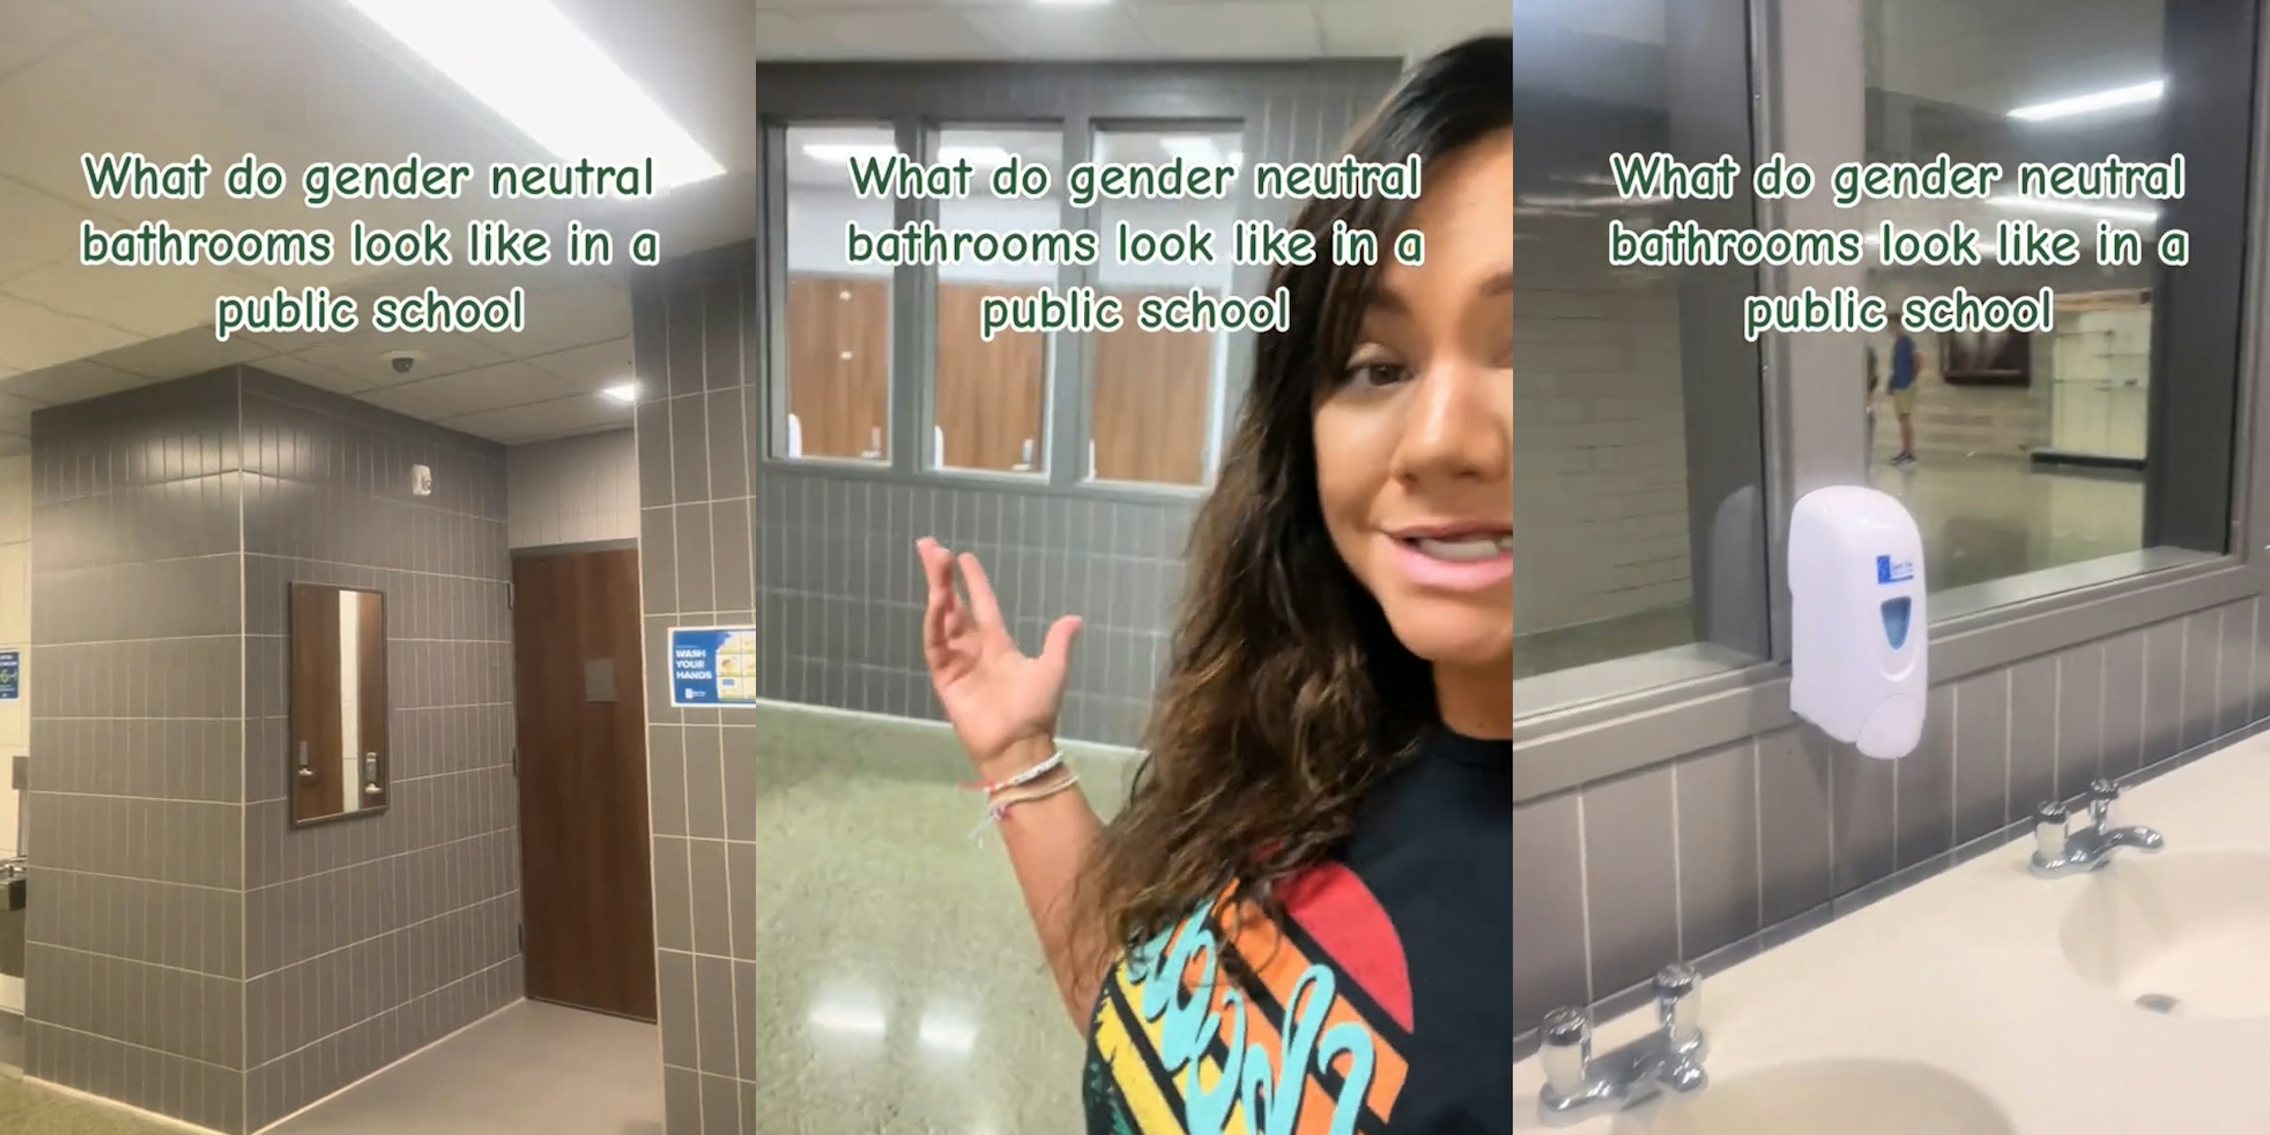 gender neutral bathroom with caption 'What do gender neutral bathrooms look like in a public school' (l) woman speaking next to gender neutral bathroom with caption 'What do gender neutral bathrooms look like in a public school' (c) interior of gender neutral bathroom with caption 'What do gender neutral bathrooms look like in a public school' (r)